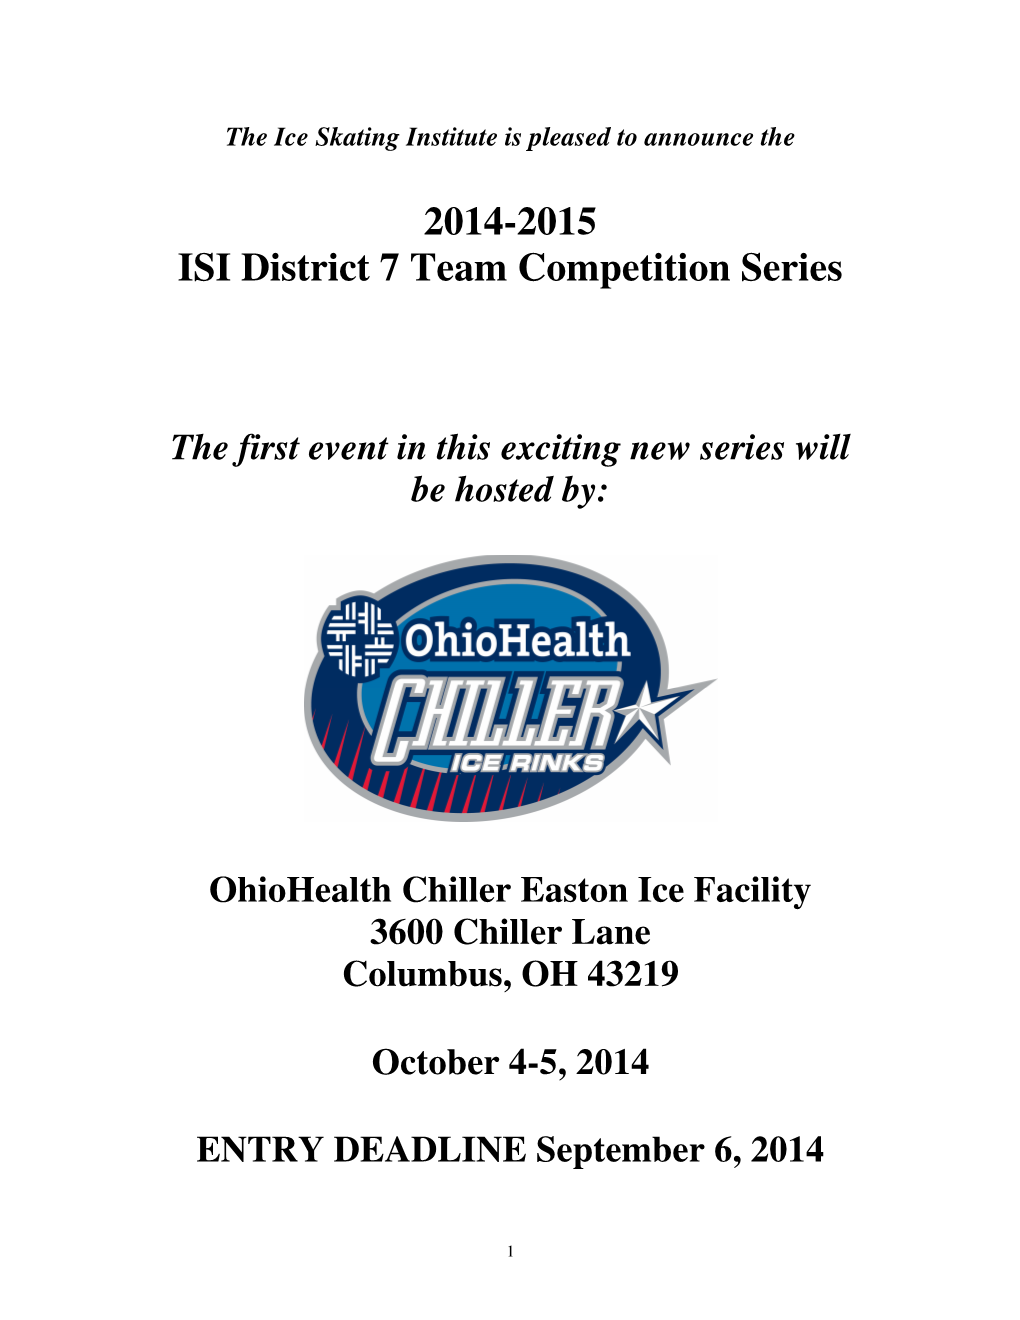 2014-2015 ISI District 7 Team Competition Series